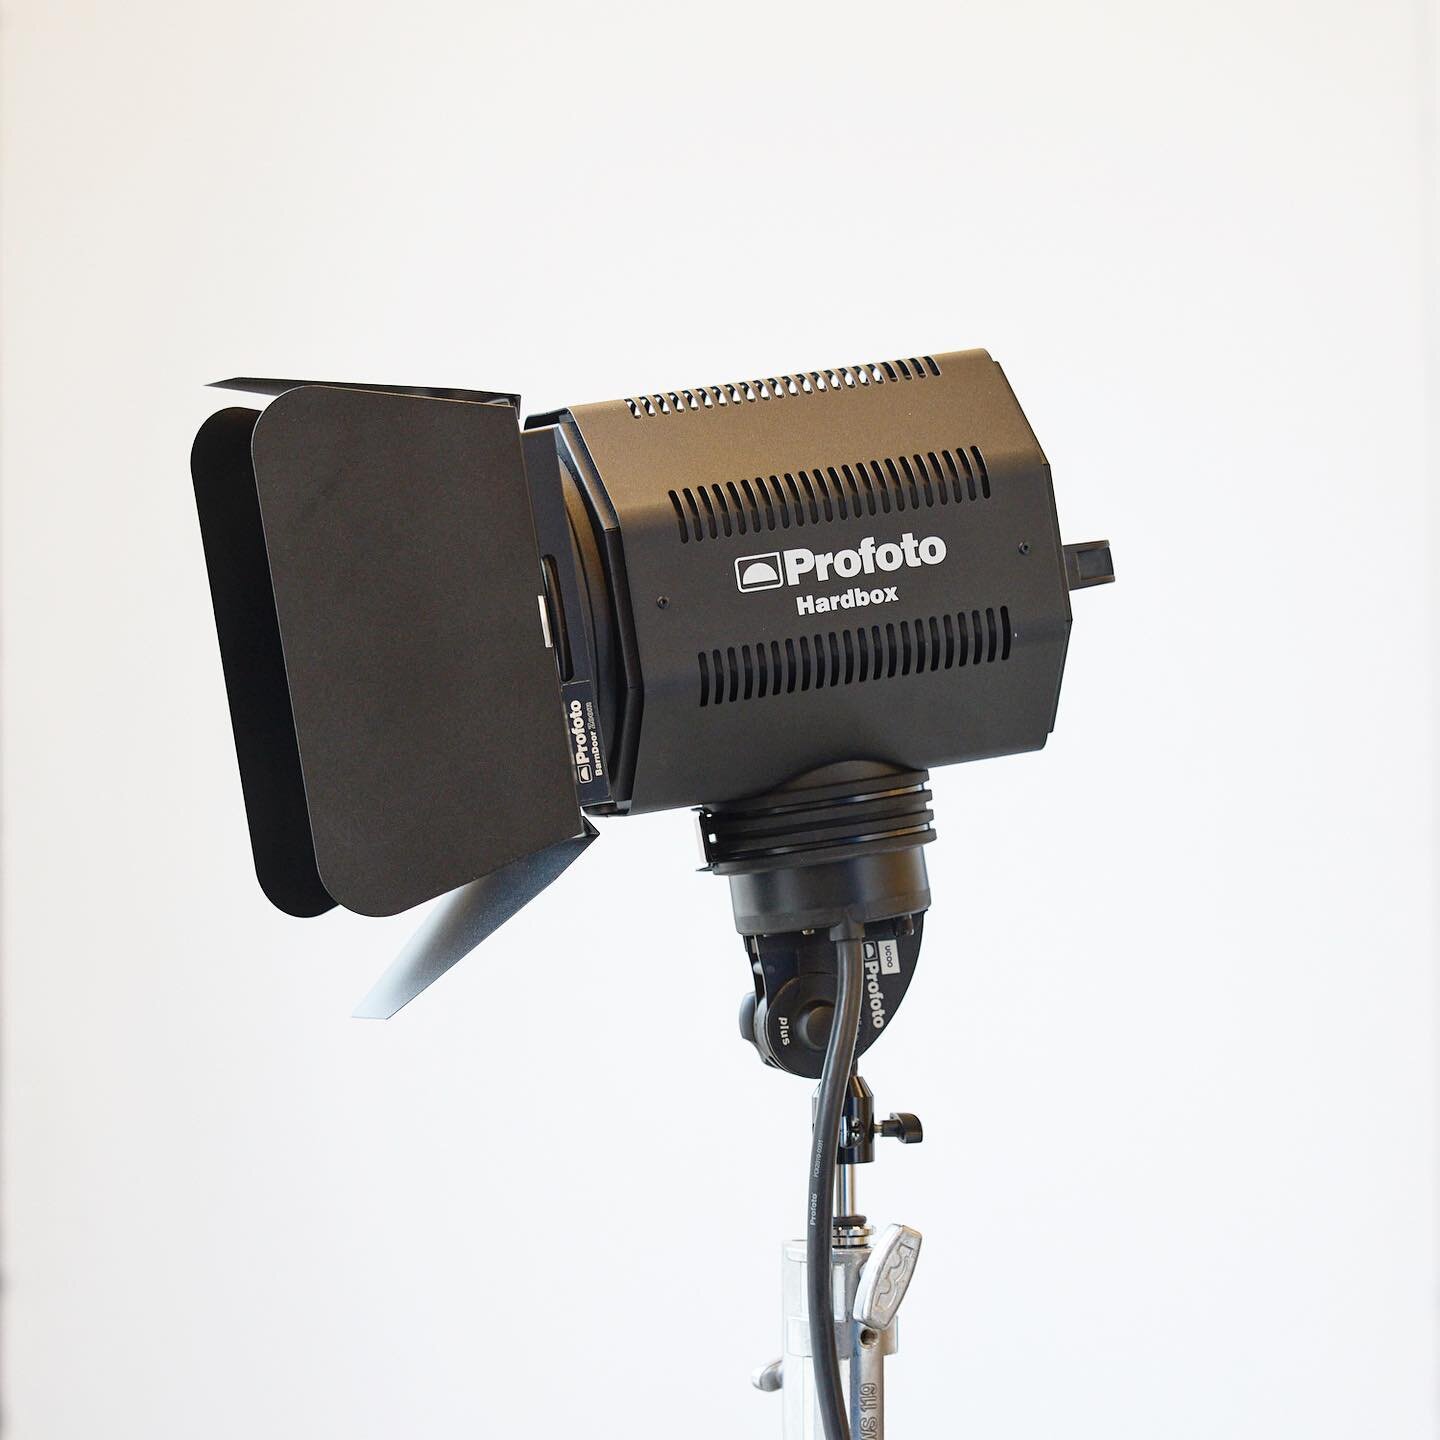 Are you looking to create believable sunlight in studio.  Give the Profoto Hard Box a try ! Very unique way of creating a sunlit feel. Avail at UCOO now.  Stay tuned for lots more exciting additions in the coming weeks!